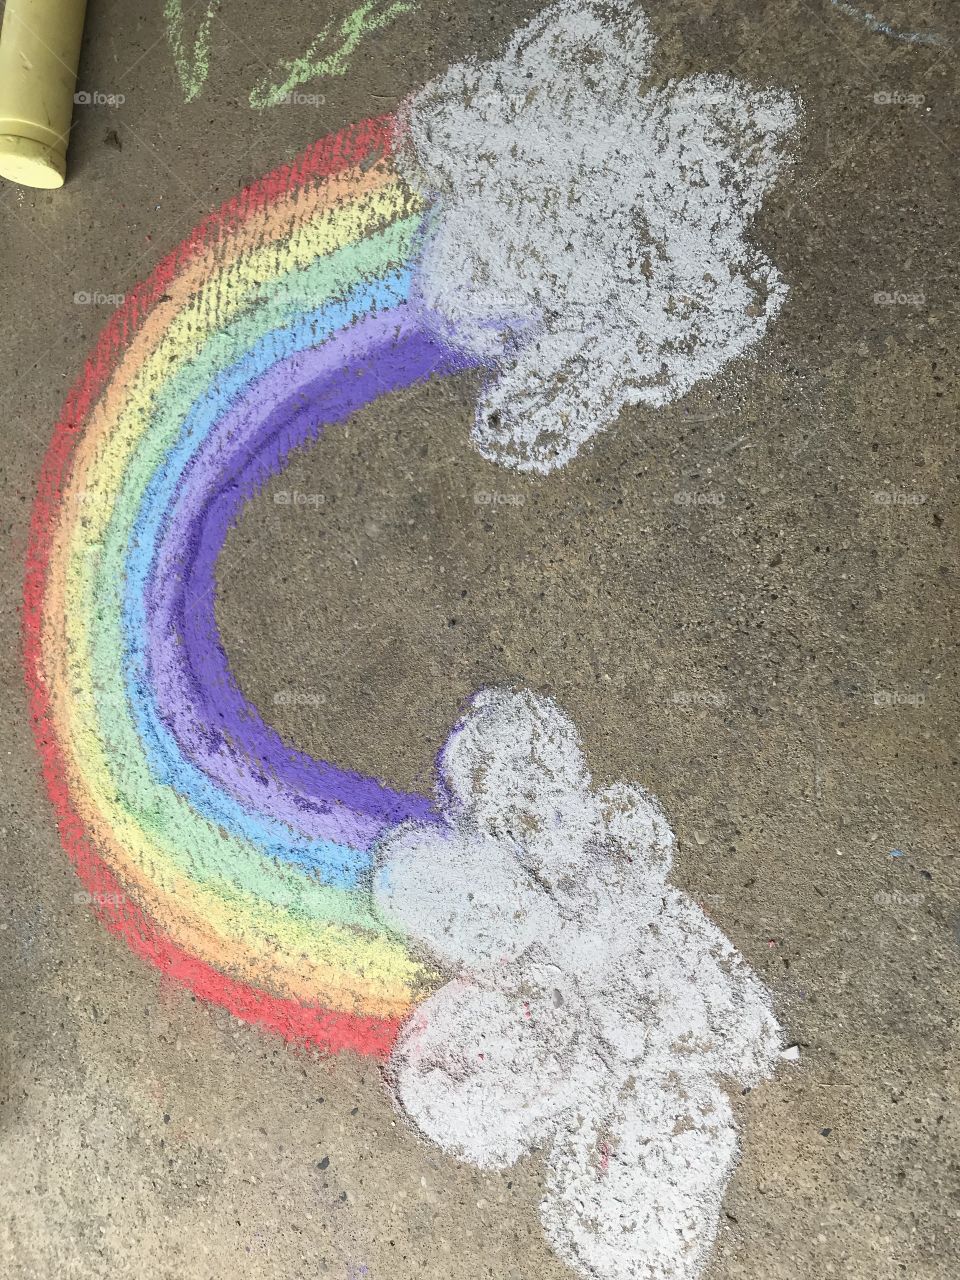 Drawing and coloring with sidewalk chalk 